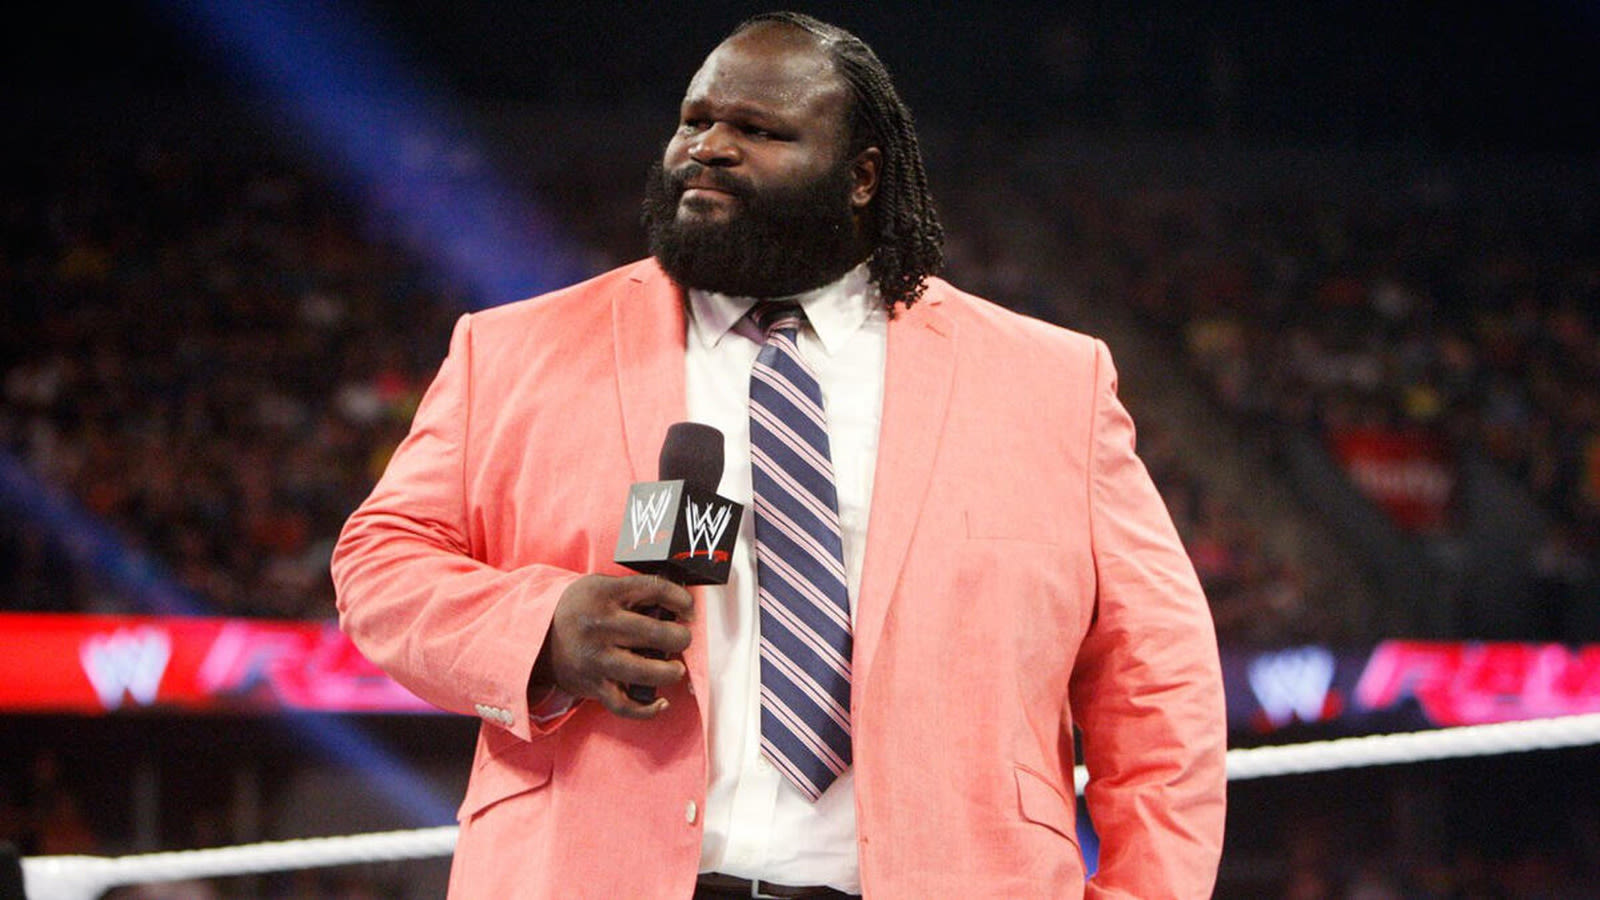 Mark Henry Reacts To His Episode Of Biography: WWE Legends On A&E - Wrestling Inc.